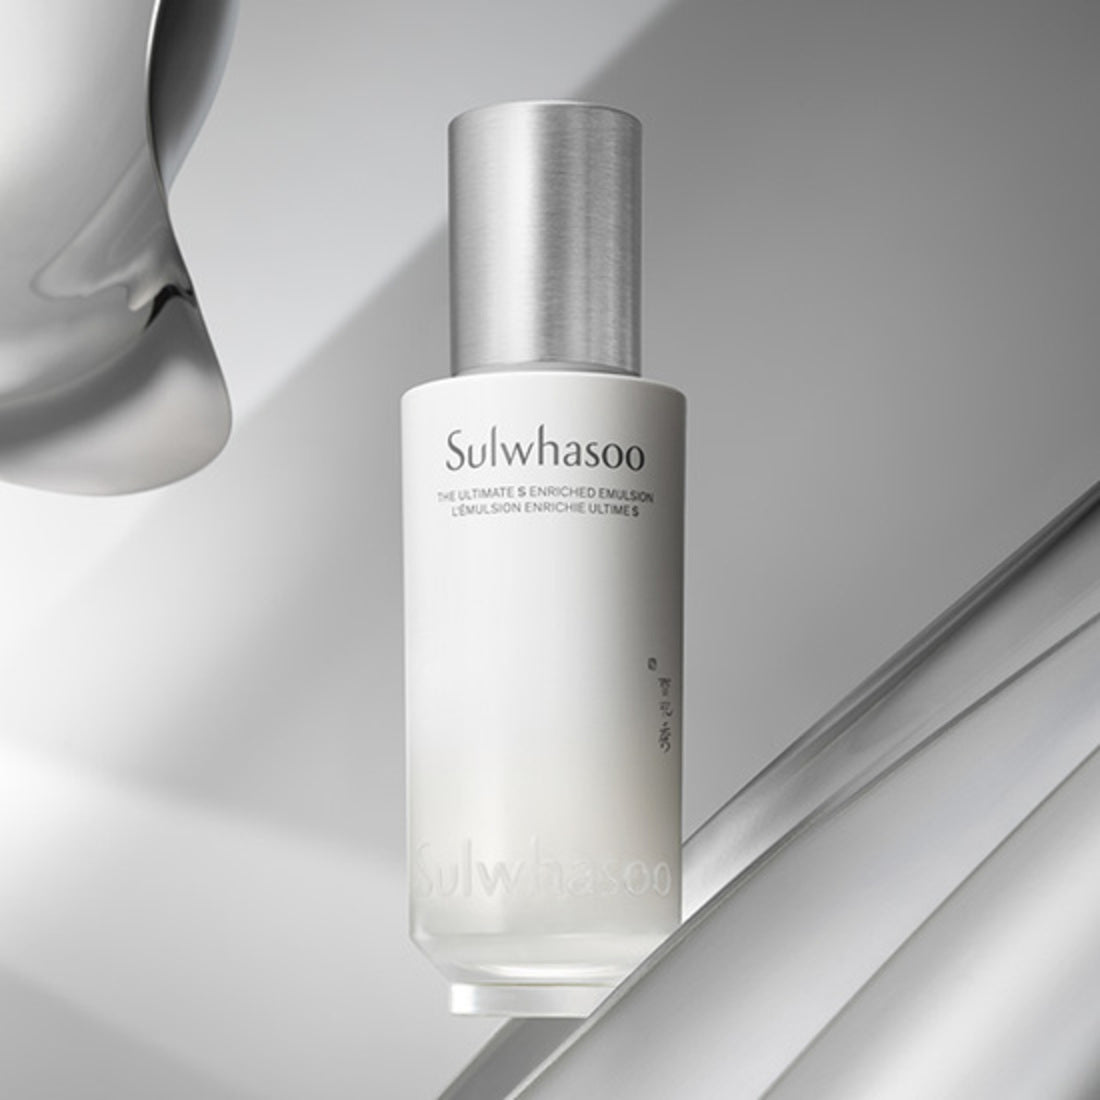 Sữa Dưỡng Sulwhasoo The Ultimate S Enriched Emulsion - Kallos Vietnam